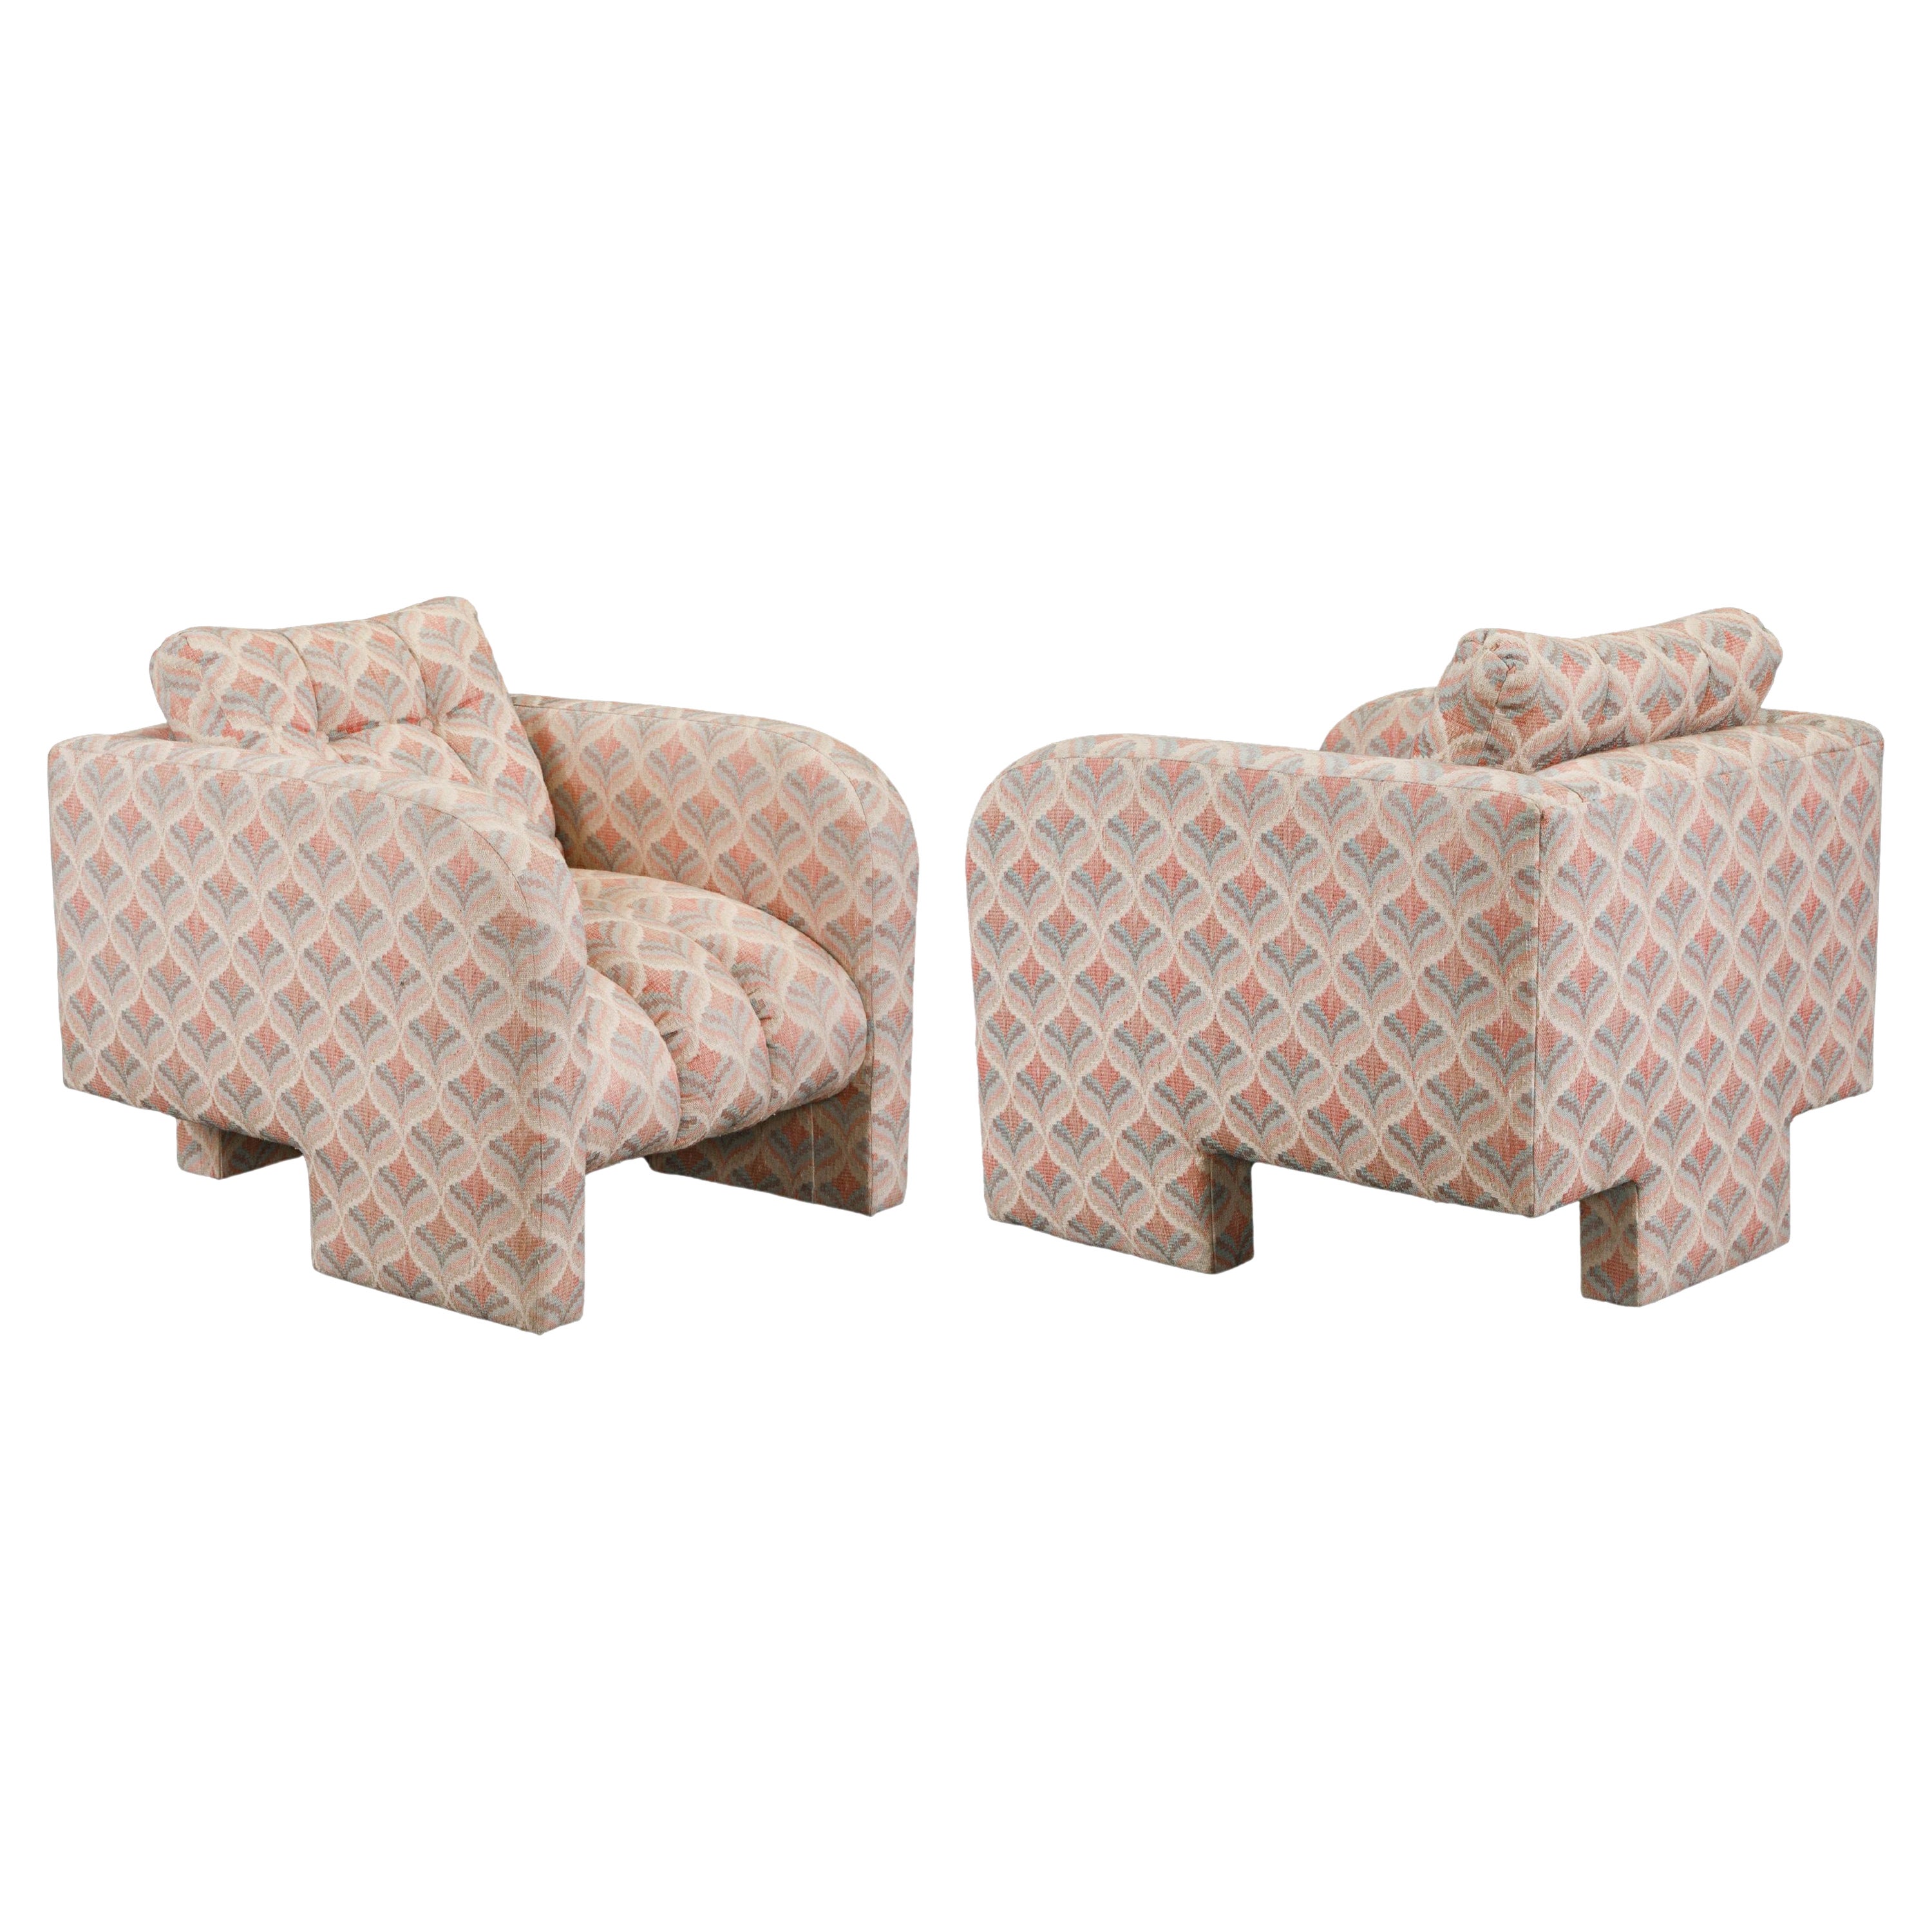 Post-Modern Channel Tufted Lounge Chairs, Attributed to Vladimir Kagan, 1980s For Sale